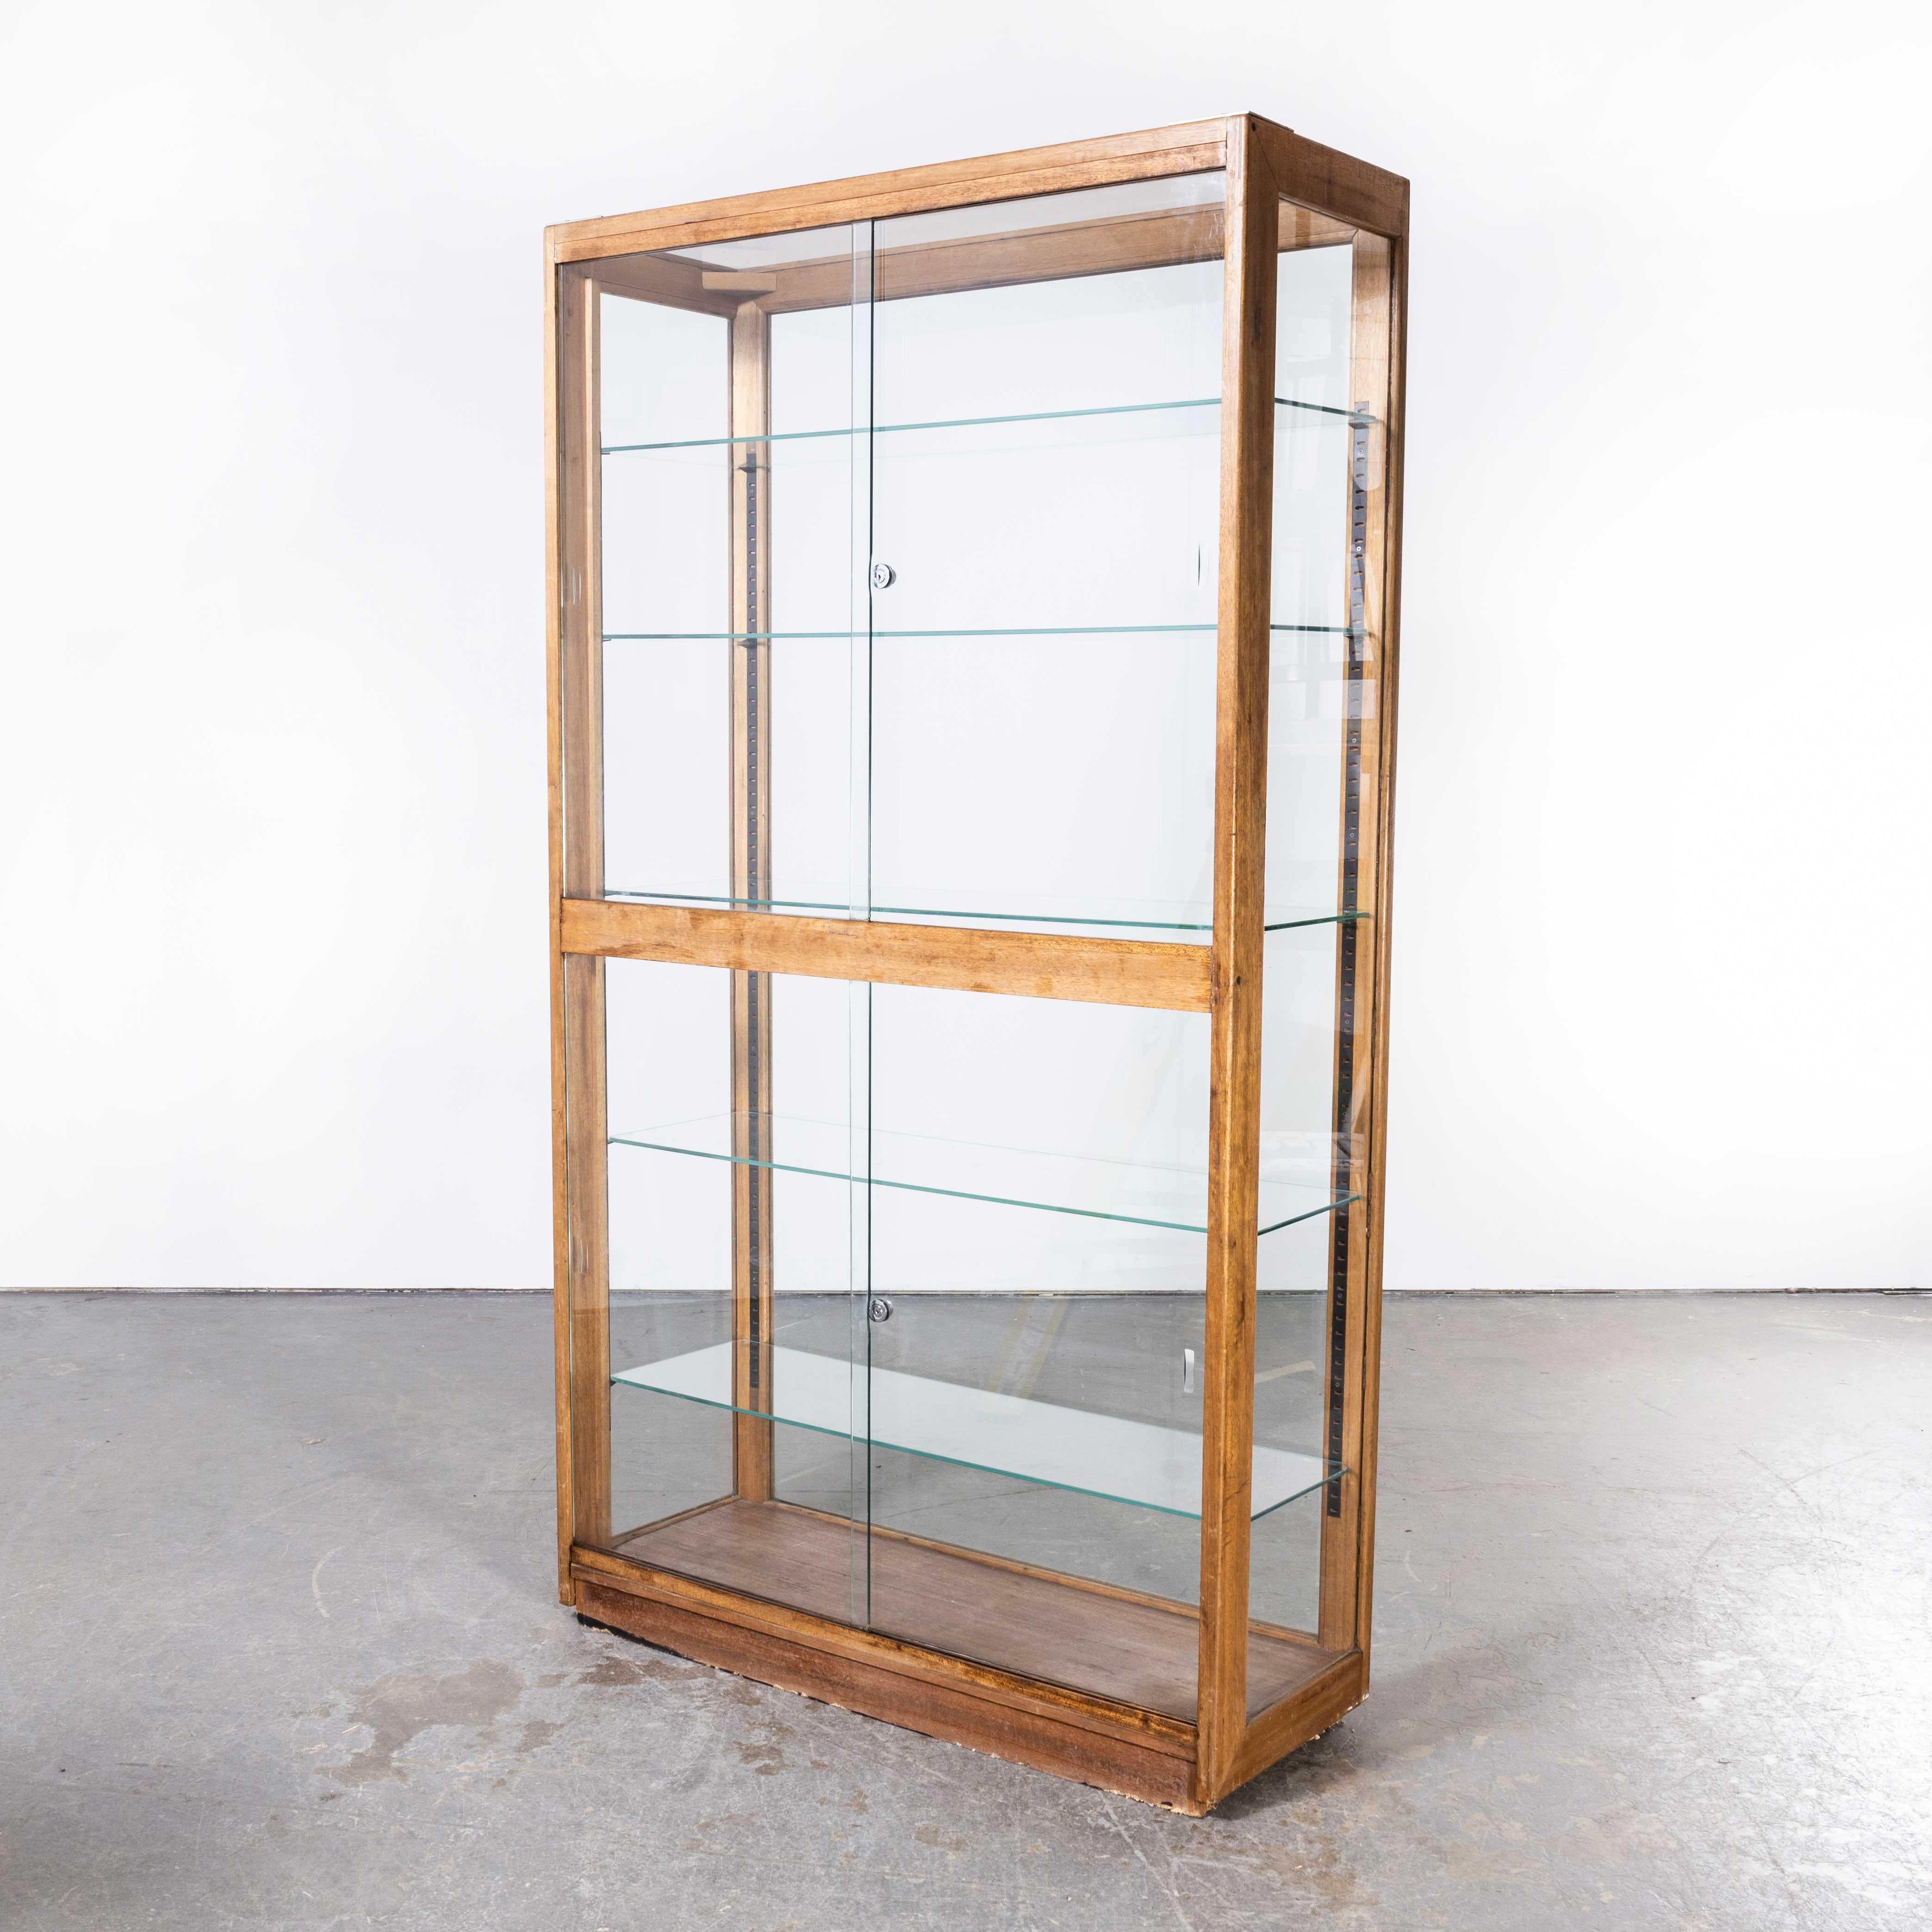 1950’s Birch Glass Shop Display Cabinet – Belgian
1950’s Birch Glass Shop Display Cabinet – Belgian. Sourced in Belgium this large all glass display cabinet came from a pharmacy where it was used on the shop floor. A large solid piece the front